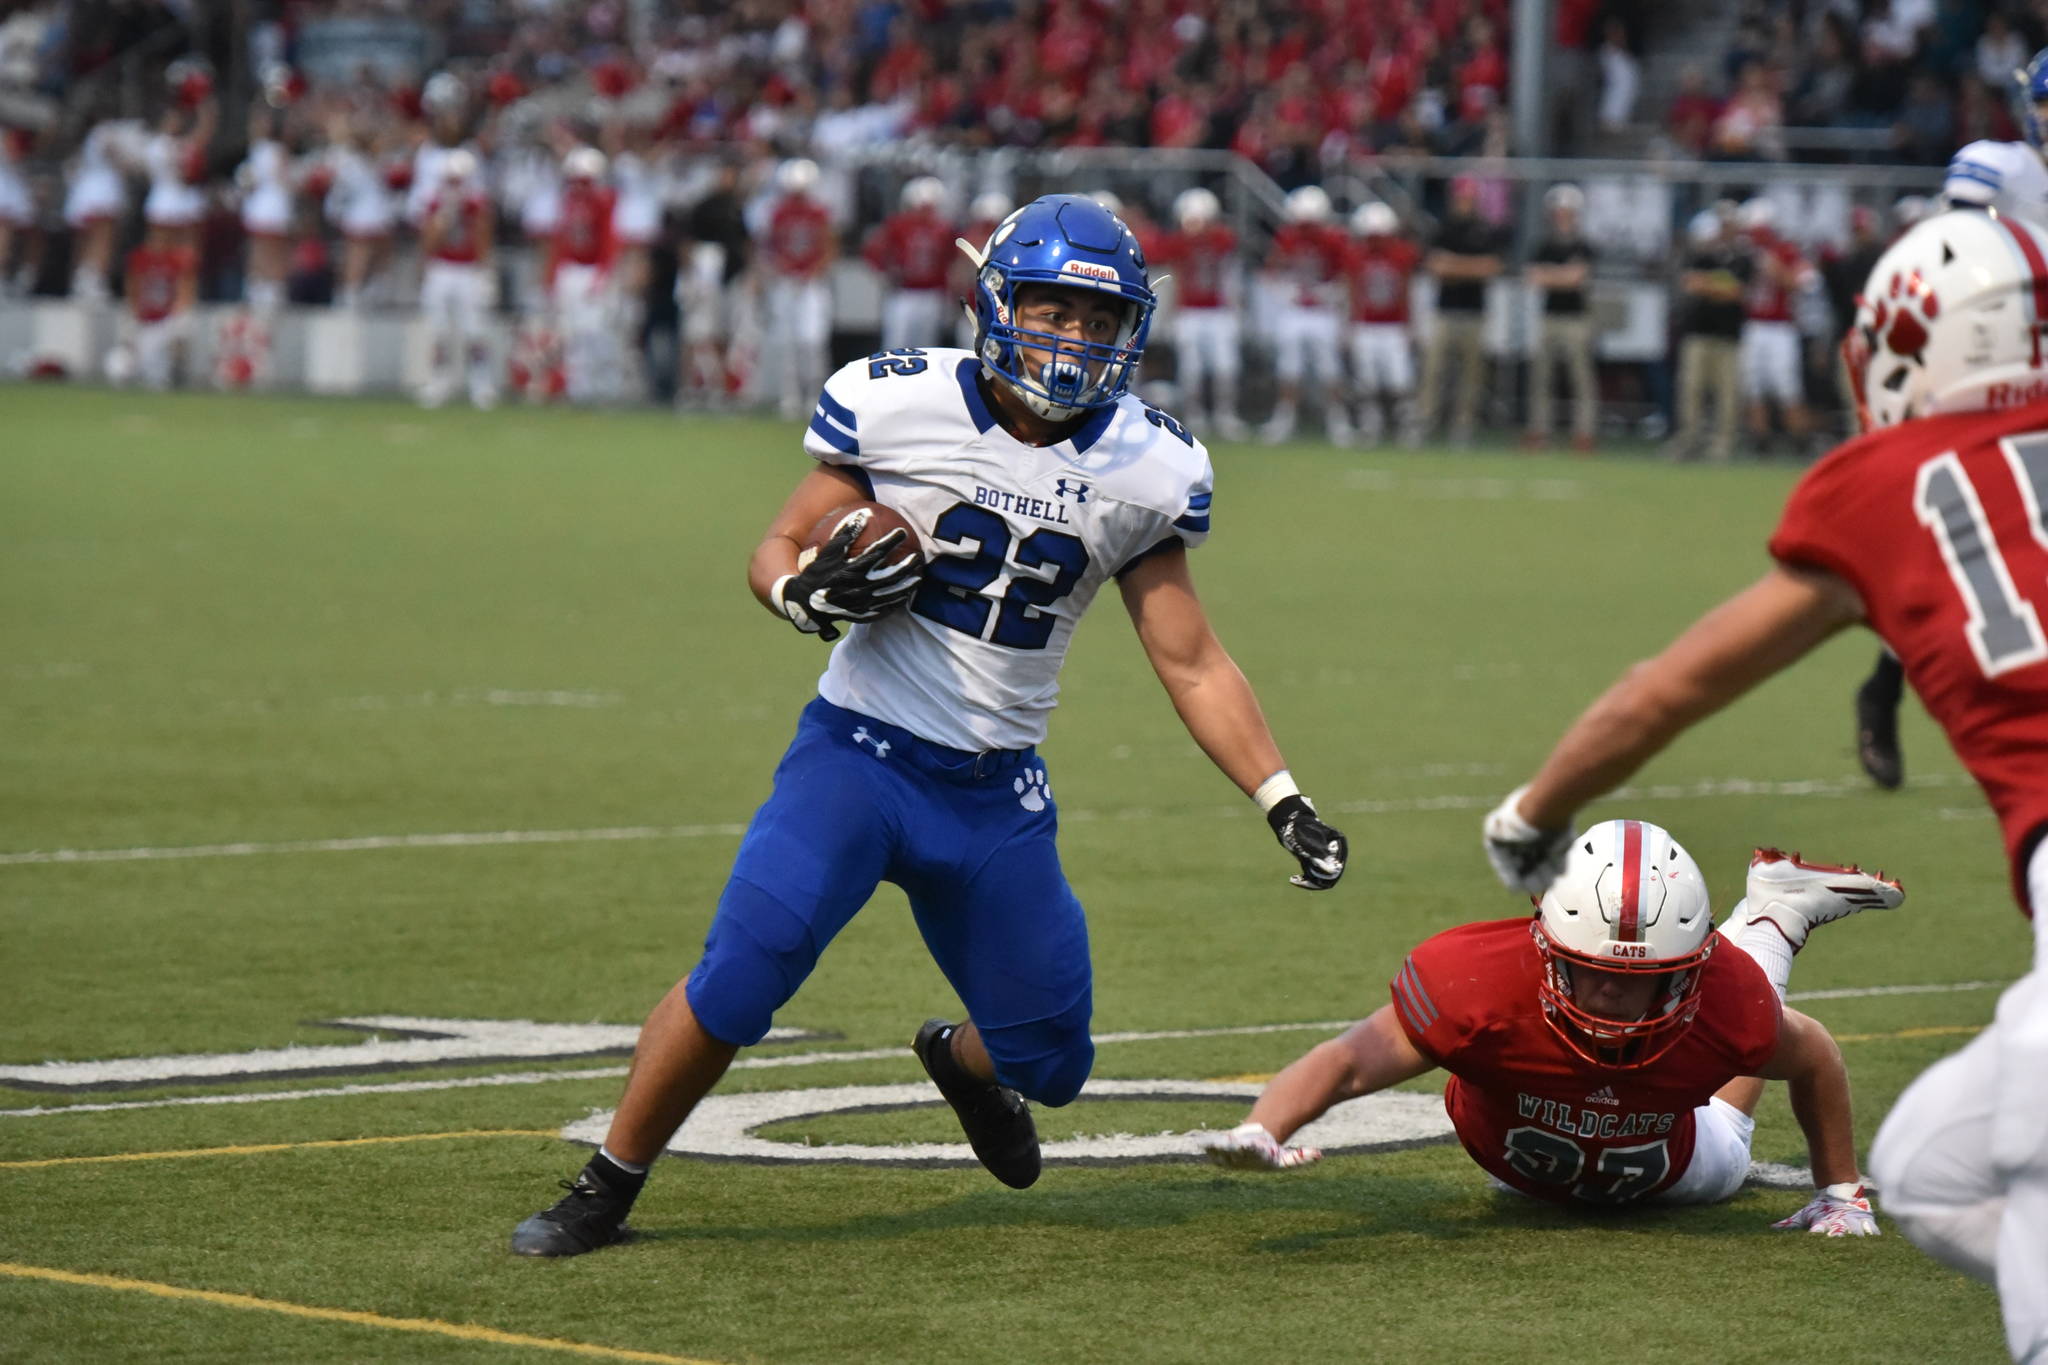 Bothell’s Christian Galvan rumbles upfield during Friday night’s game. Courtesy of Greg Nelson